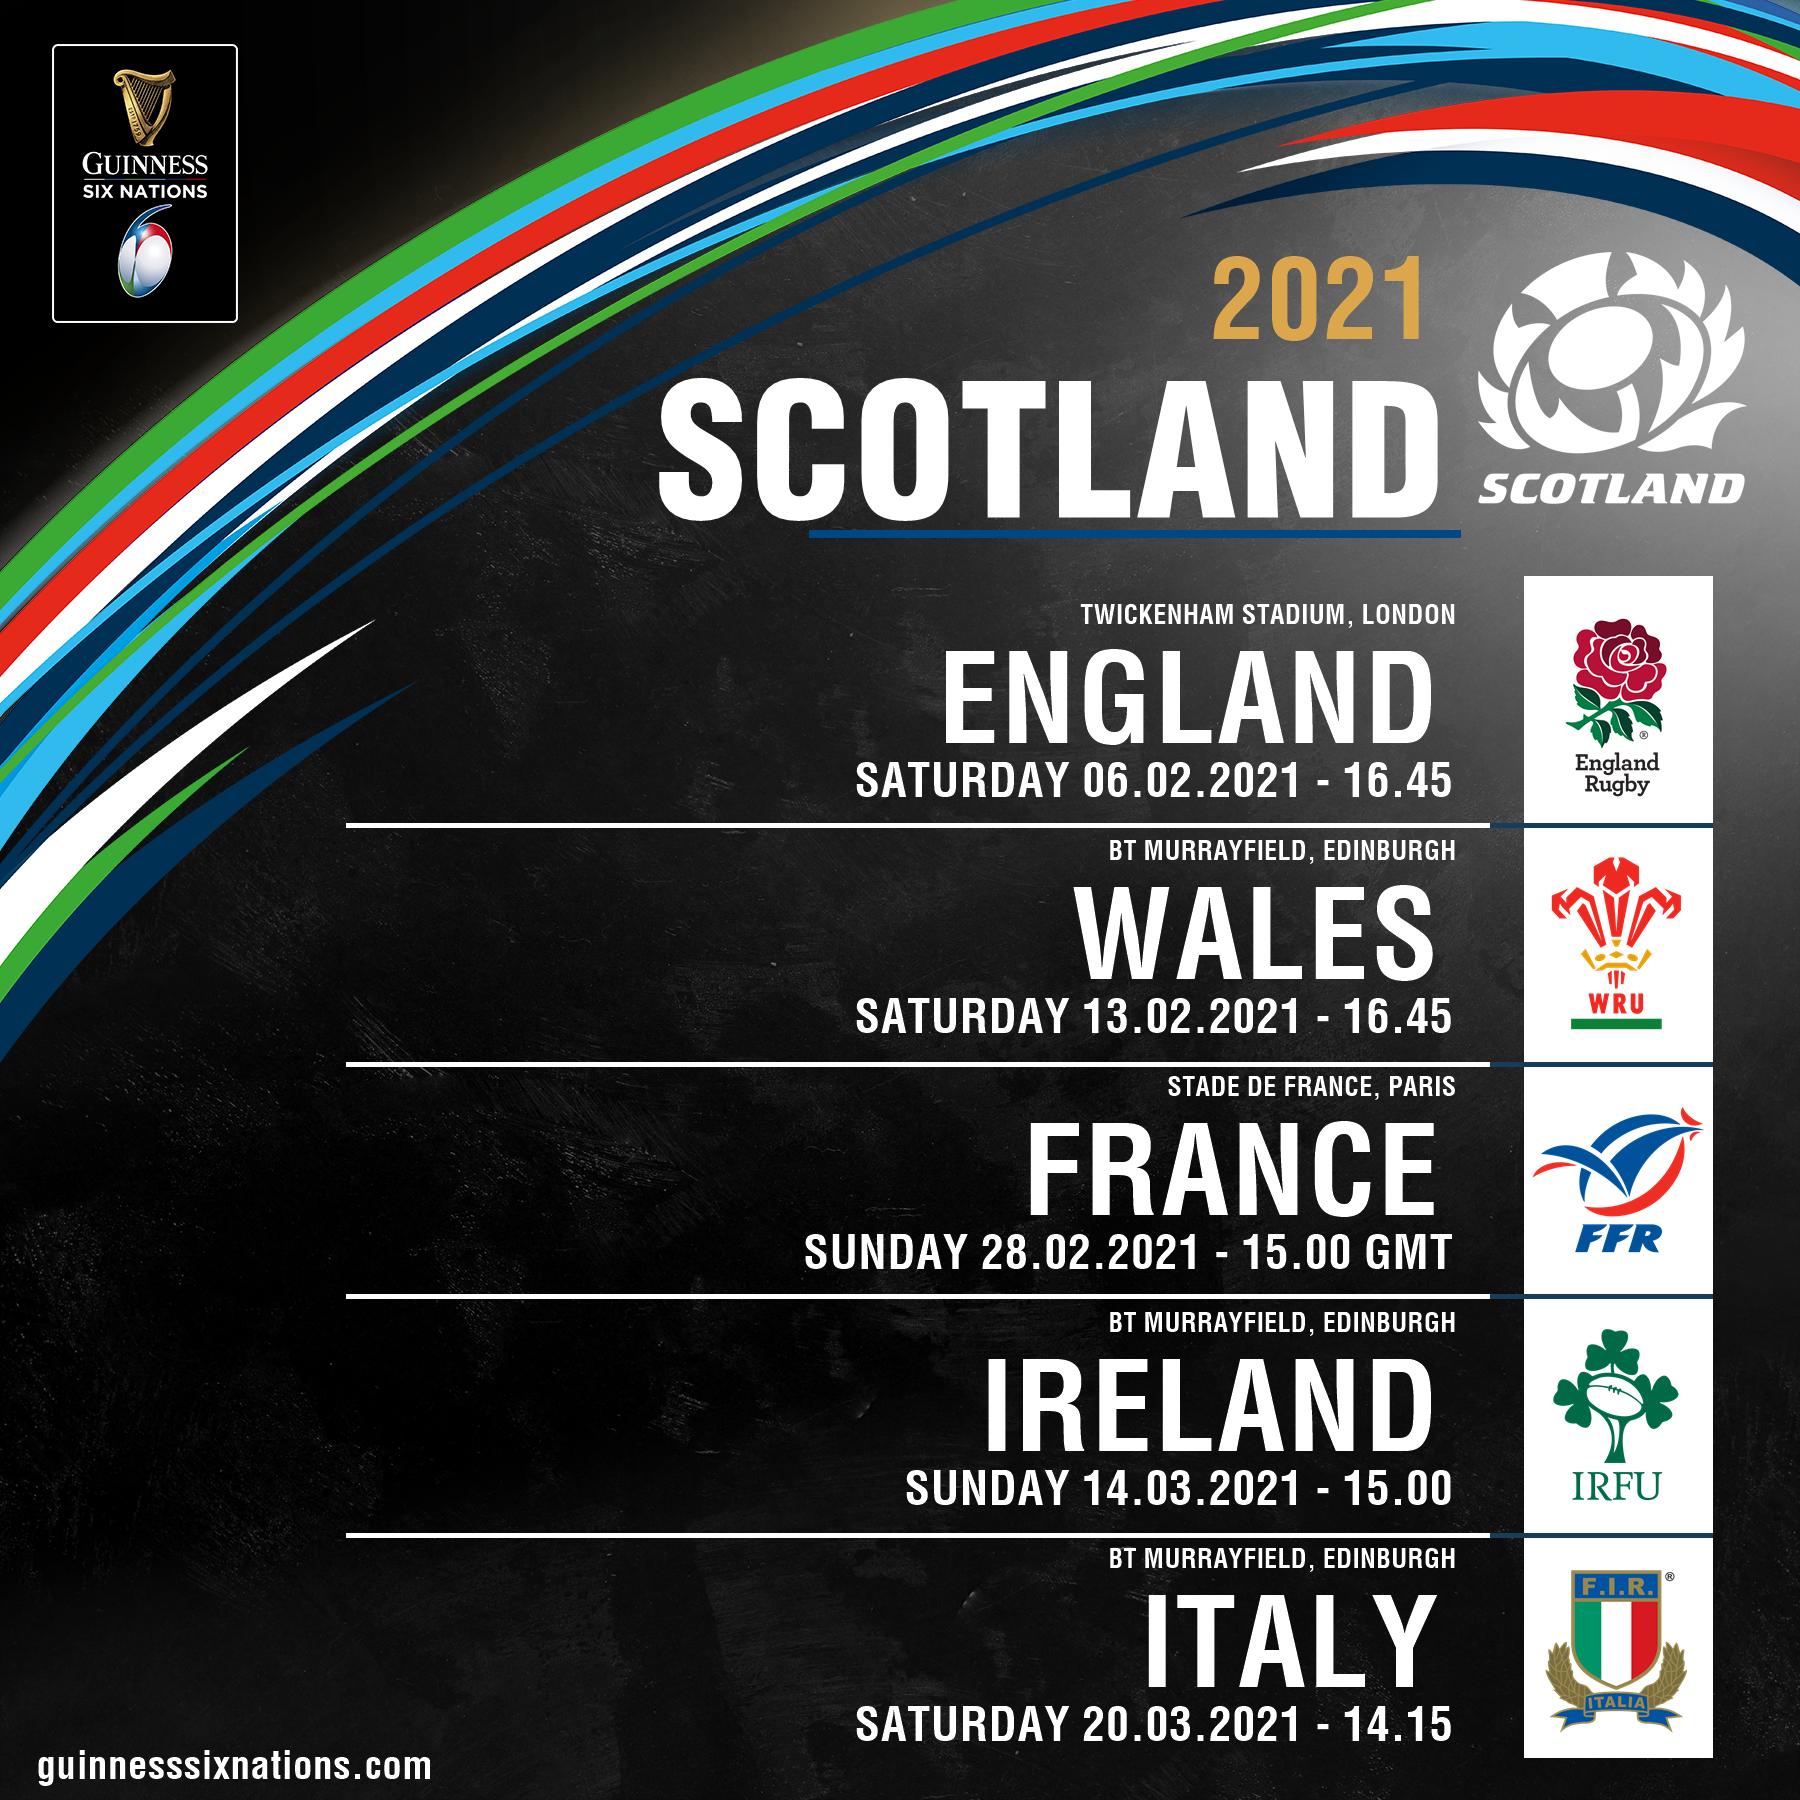 Scottish Rugby On Twitter News Guinness Six Nations Announce Fixtures For 2020 And 2021 Read The Full Story Https T Co 27humgduzm Guinnesssixnations Https T Co 3g4abn8yfo